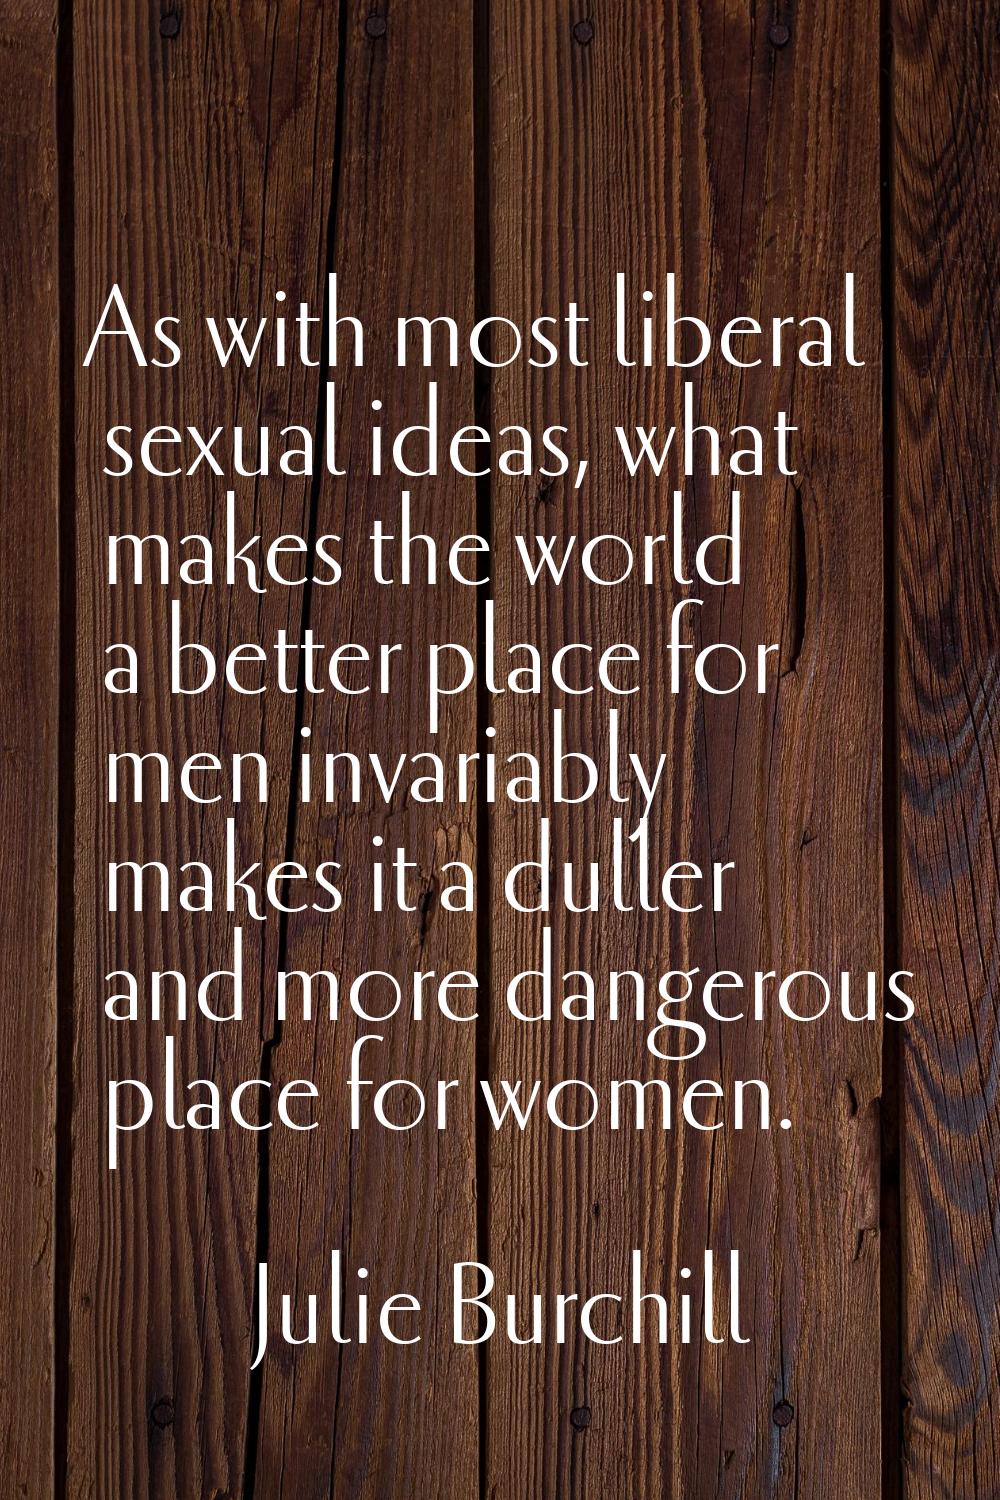 As with most liberal sexual ideas, what makes the world a better place for men invariably makes it 